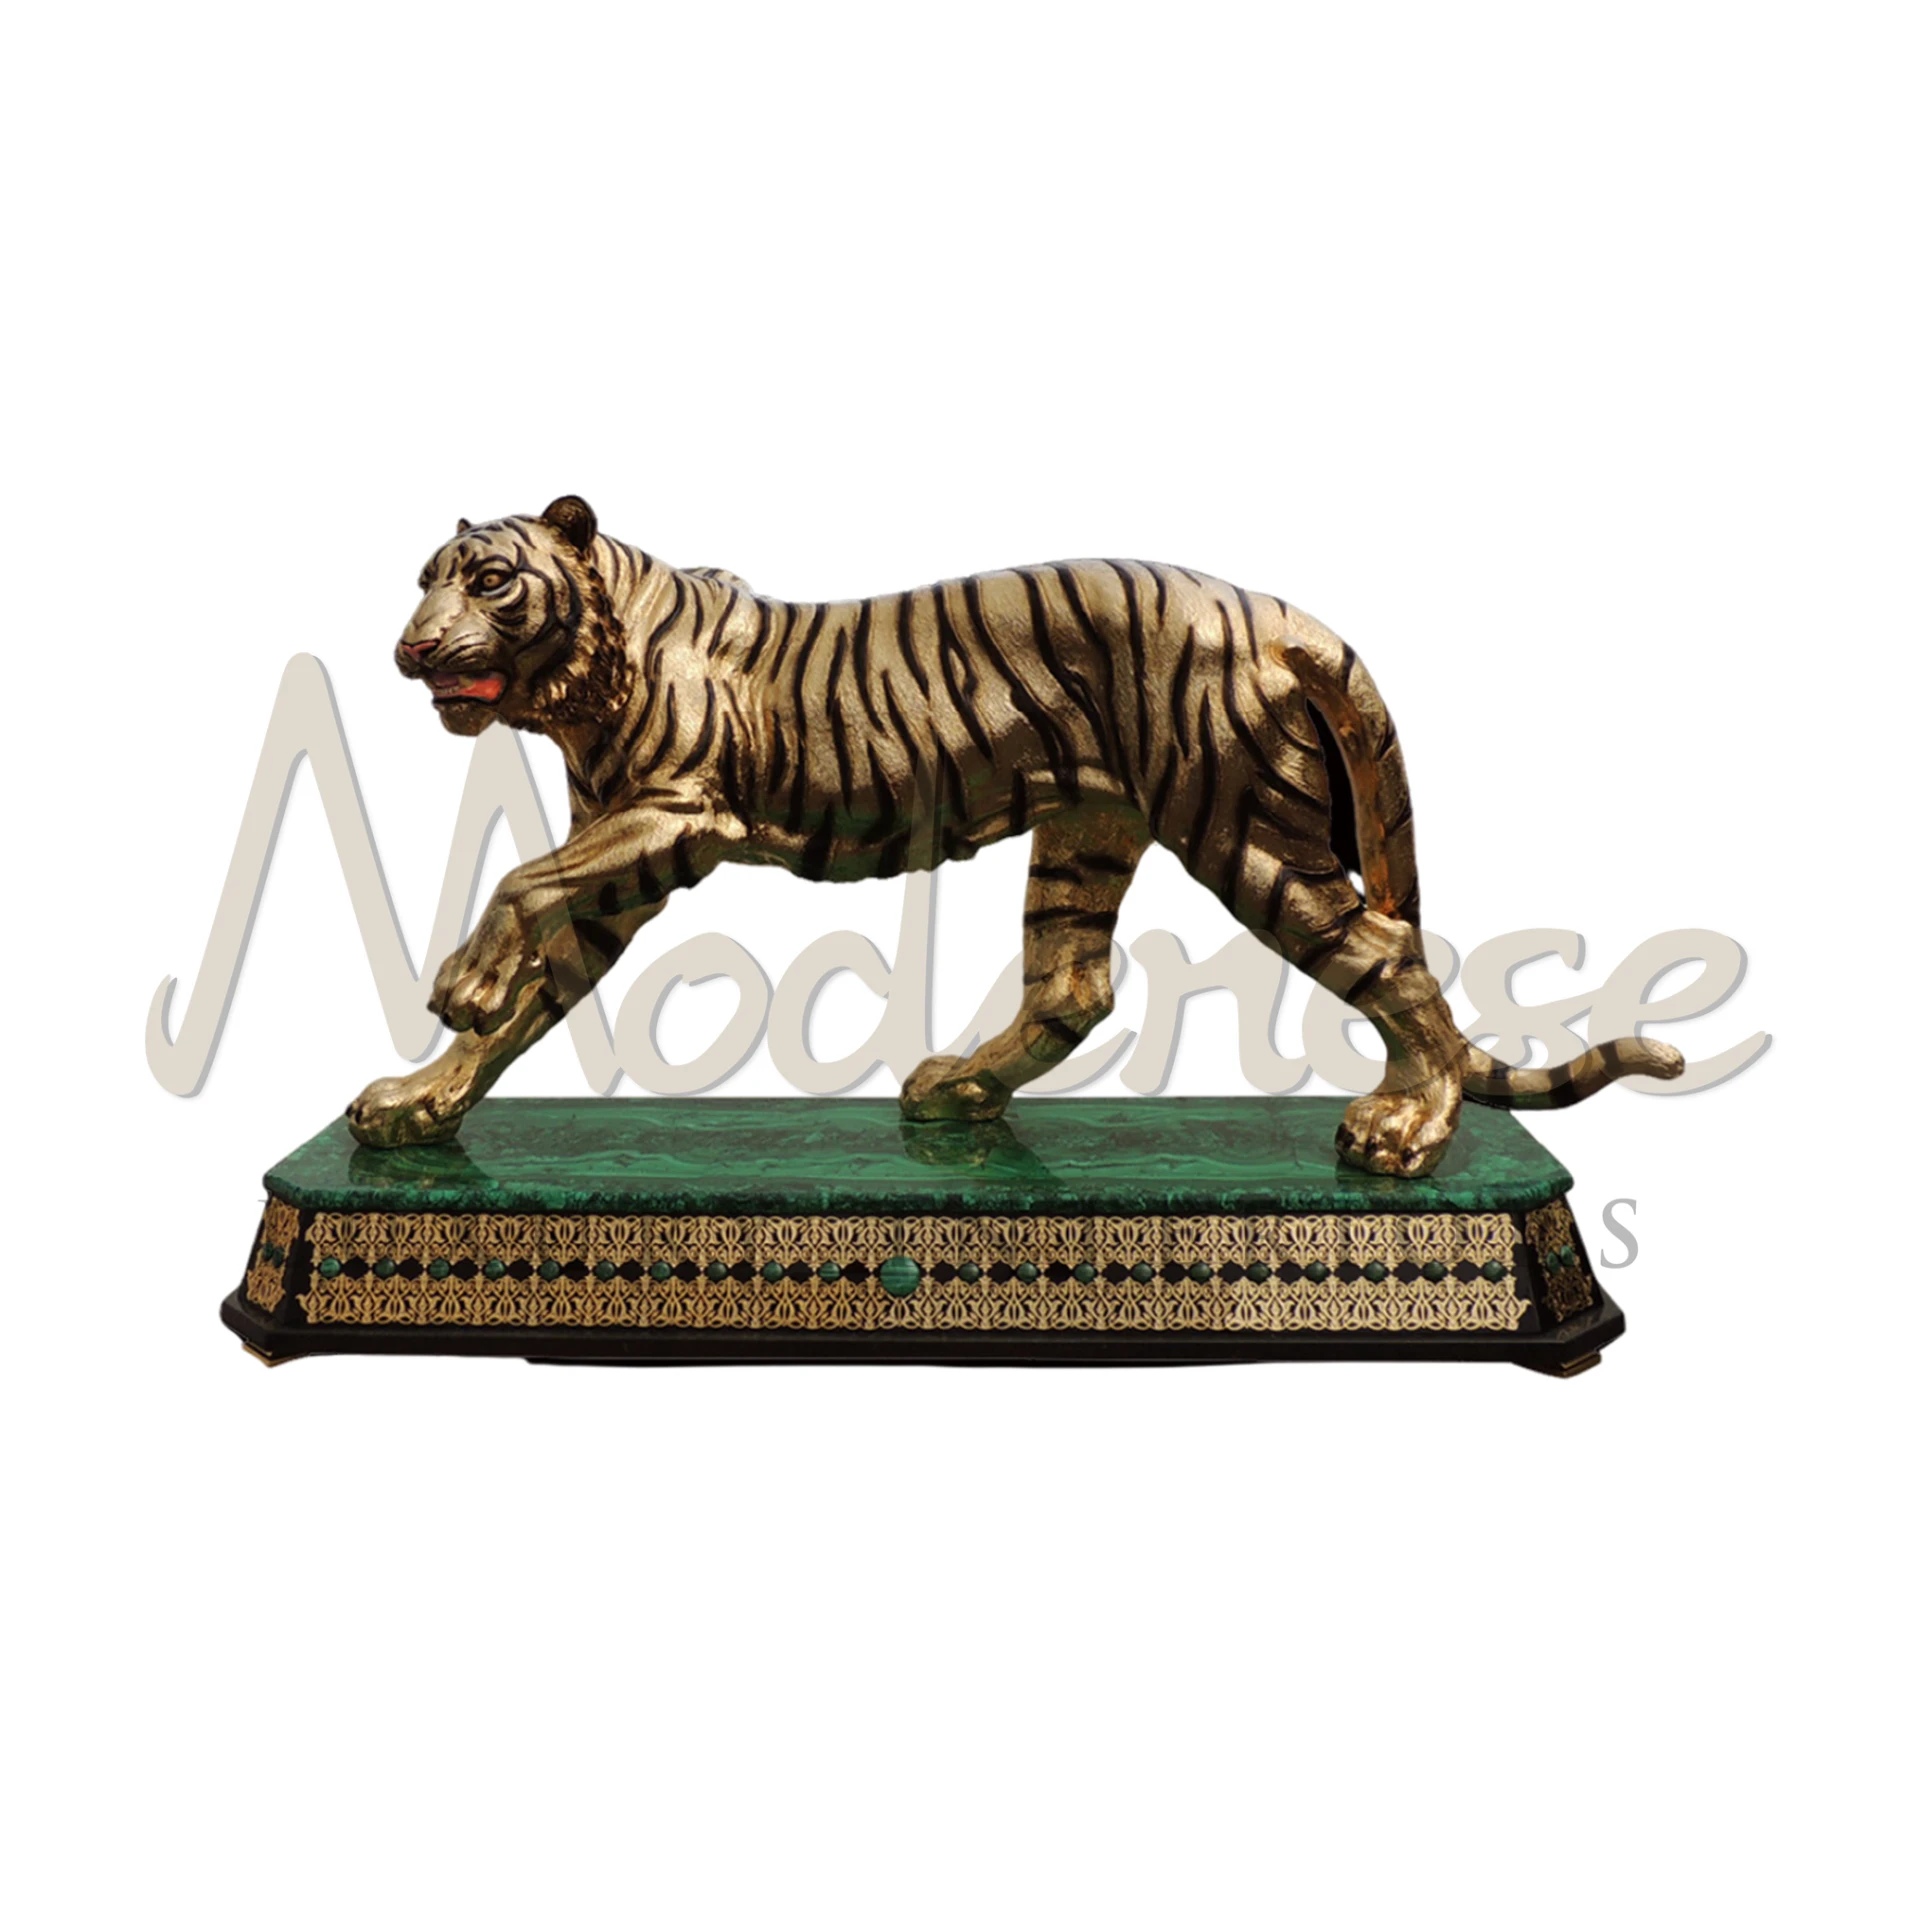 Dynamic Powerful Golden Tiger statuette, with detailed fur texture and lifelike poses, embodying luxury and strength in high-end home décor.